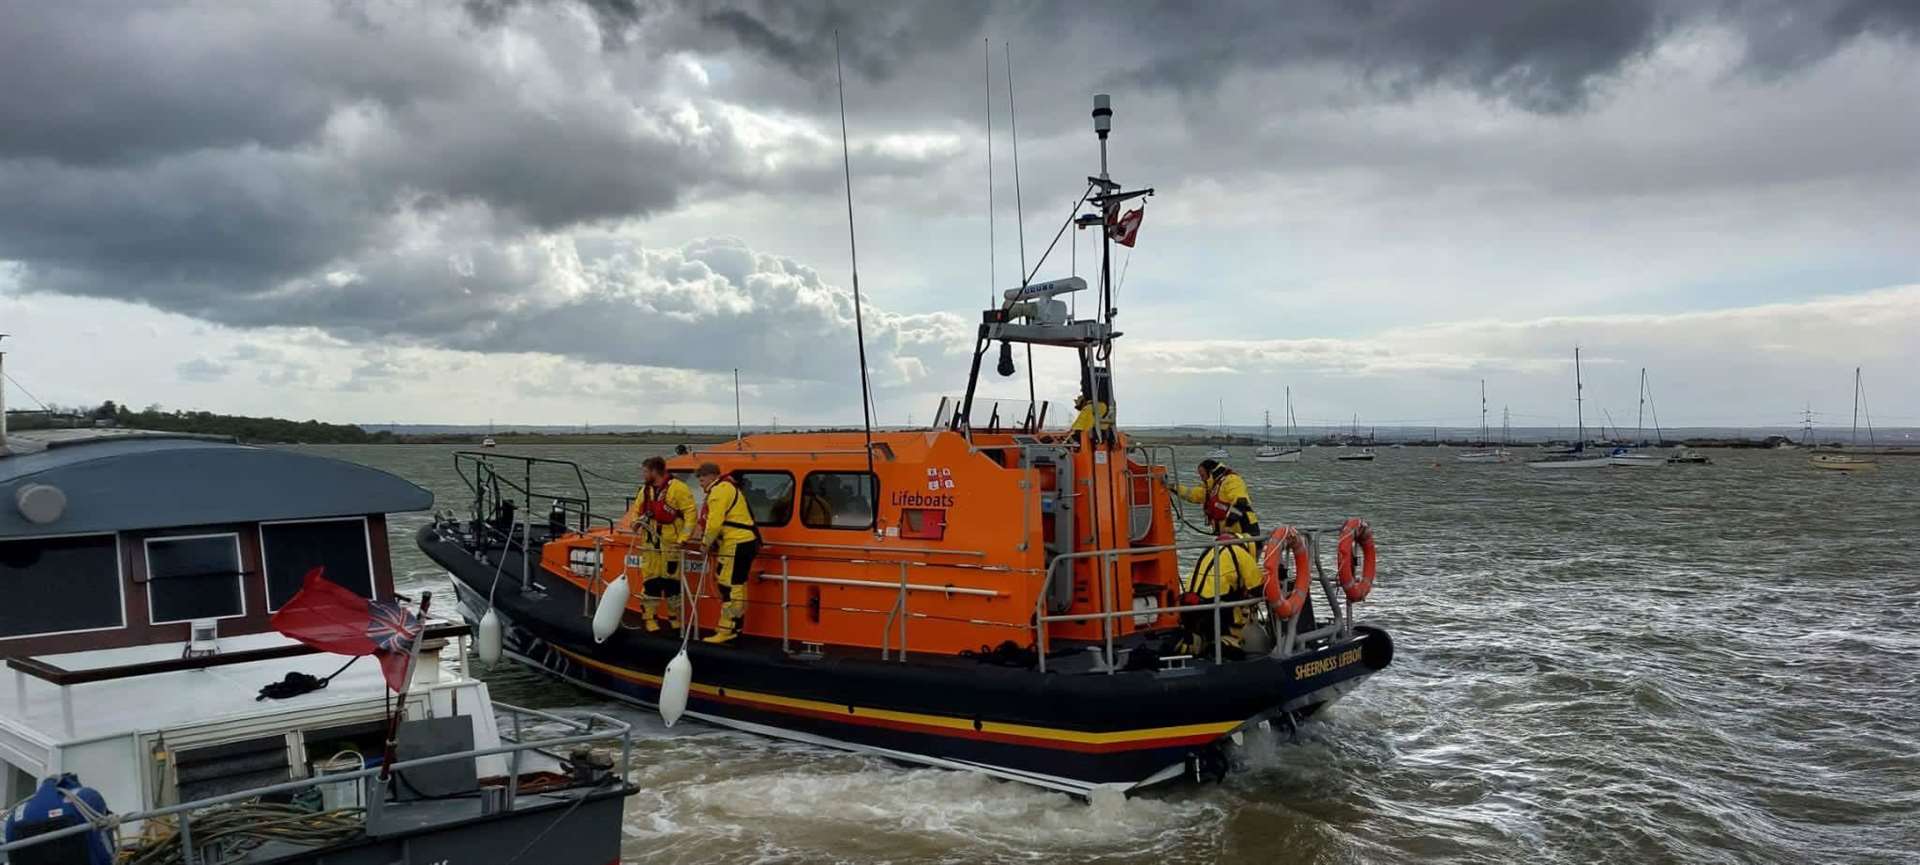 Sheerness lifeboat were called to aid John and Alan